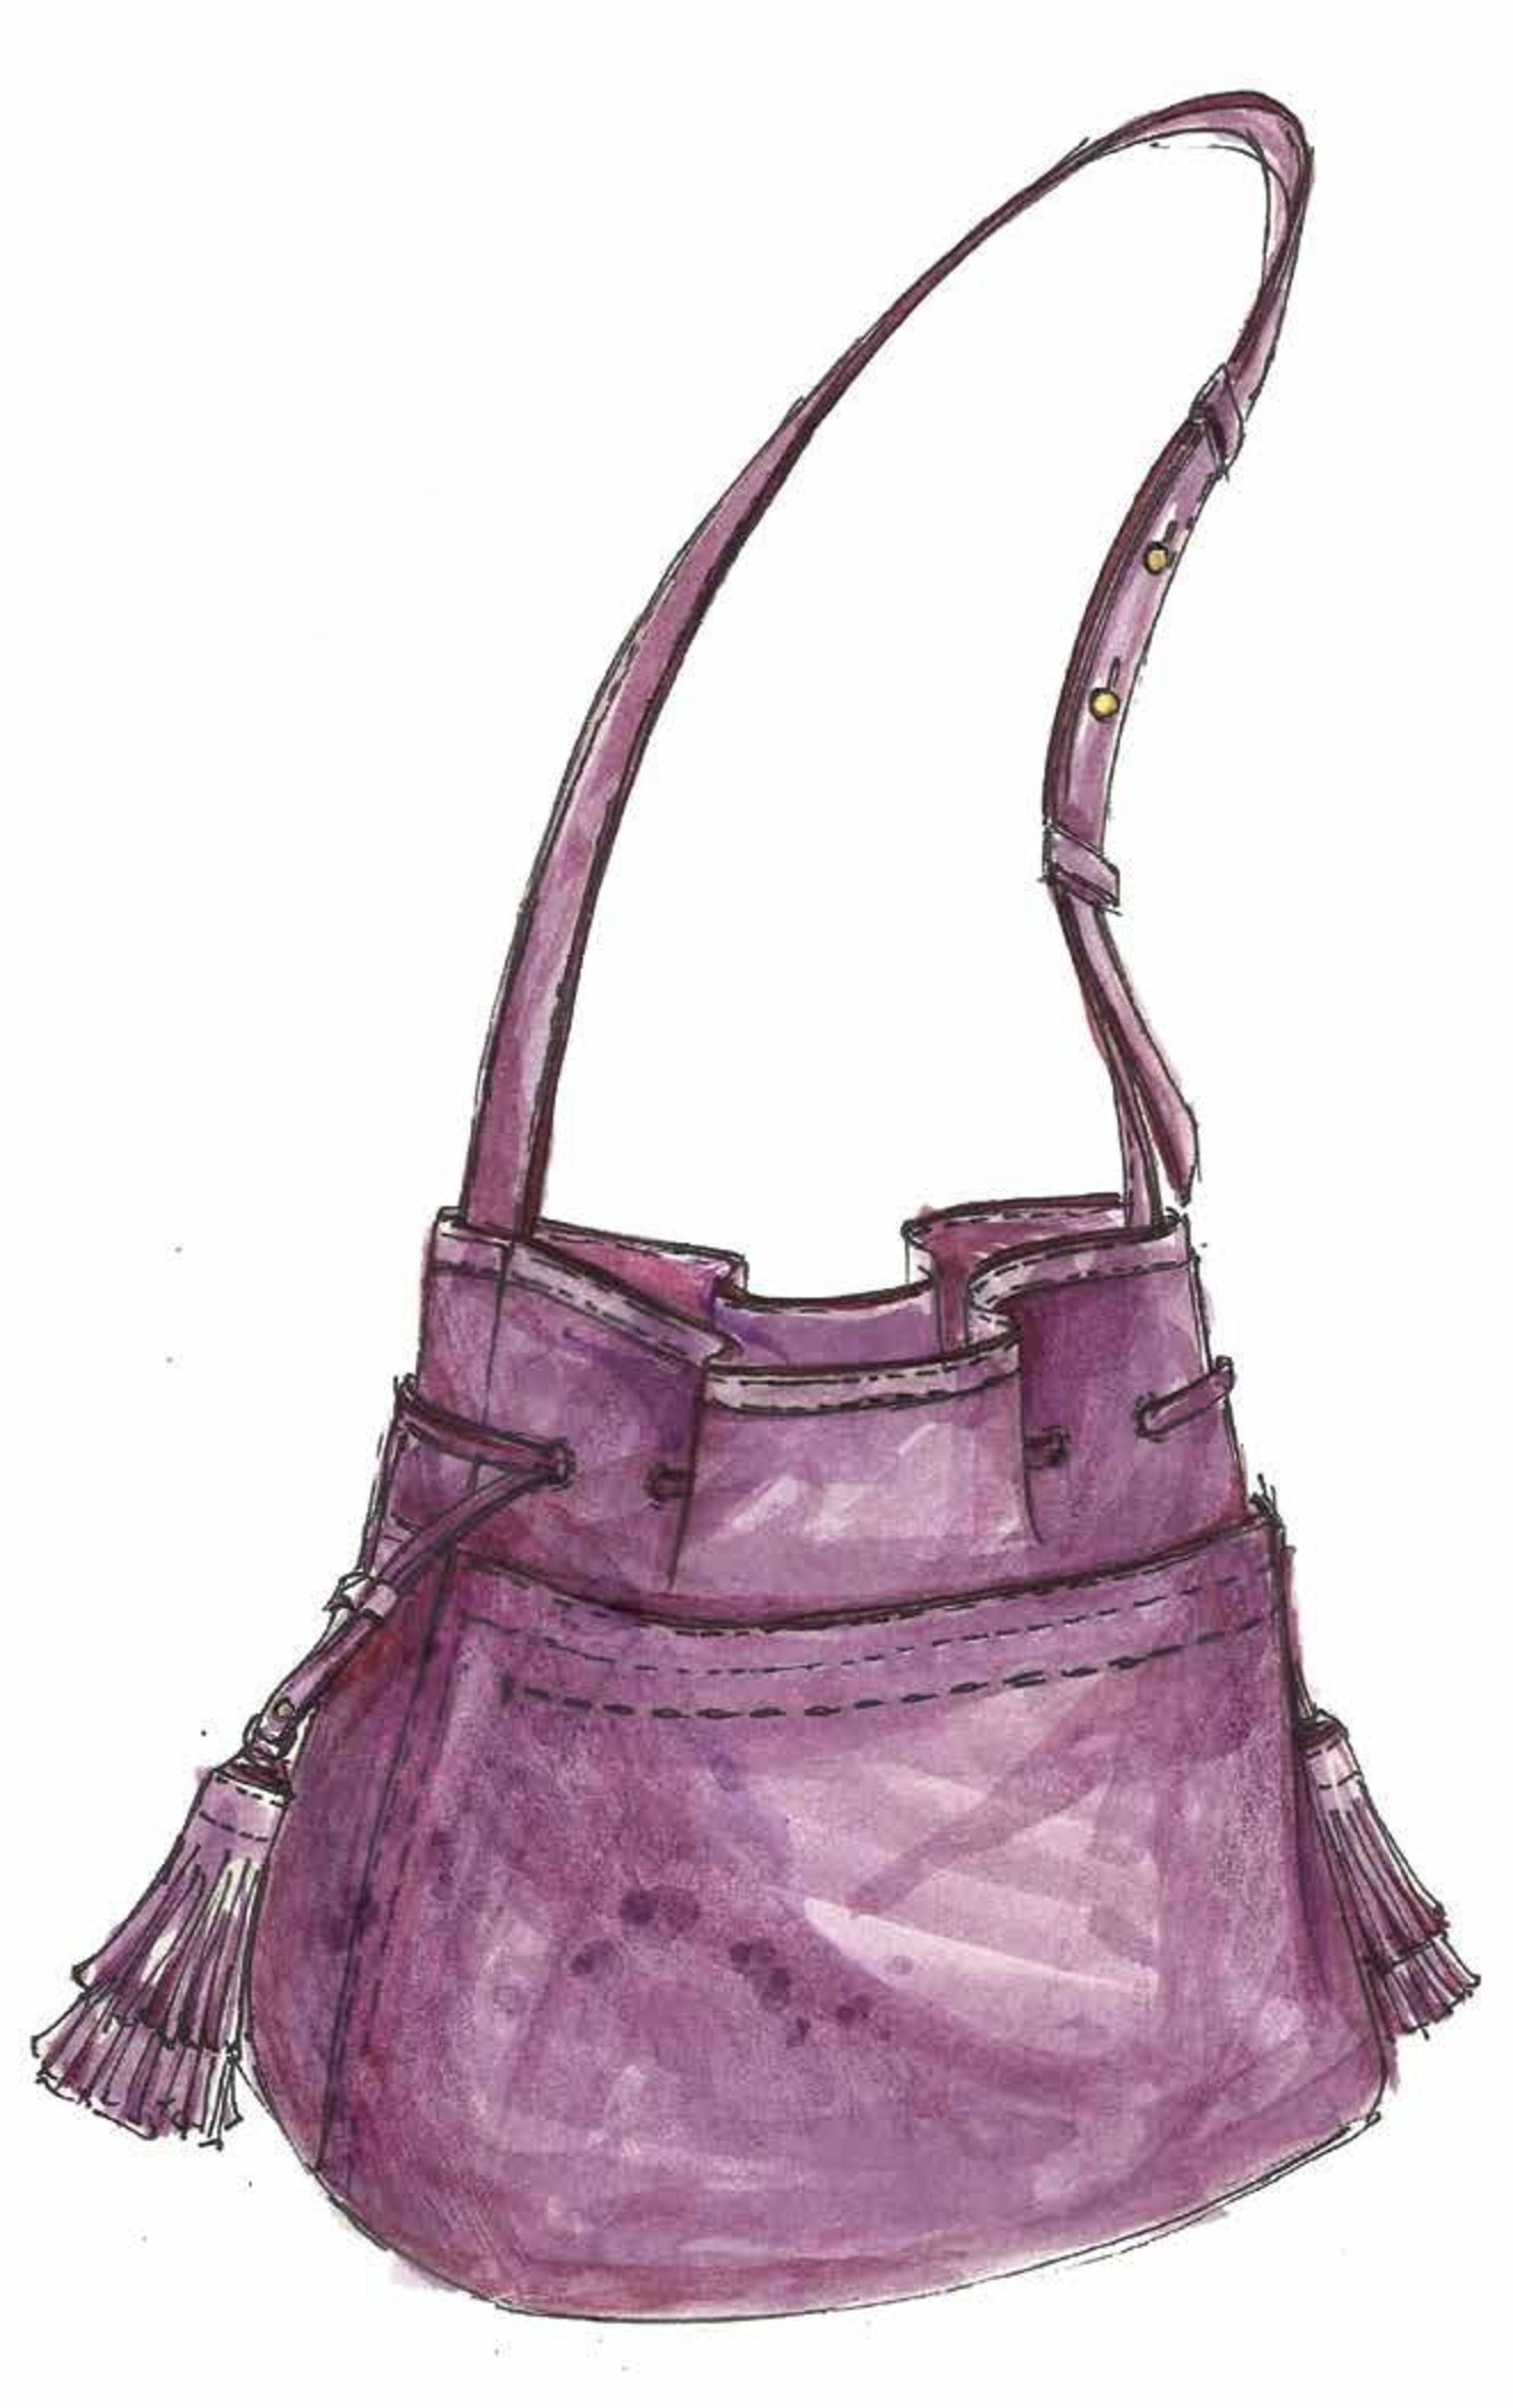 Kerry Washington's 2016 Handbag for Allstate Foundation Purple Purse: Washington designed the purple cross-body handbag, produced by Global Brands Group, for Purple Purse nonprofit community partners and domestic violence shelters to raise funds for their organizations this October. Details and rules for a chance to win one of the limited-edition handbags will be shared on PurplePurse.com and Purple Purse Facebook (facebook.com/purplepurse) and Twitter (@PurplePurse) in the coming weeks.